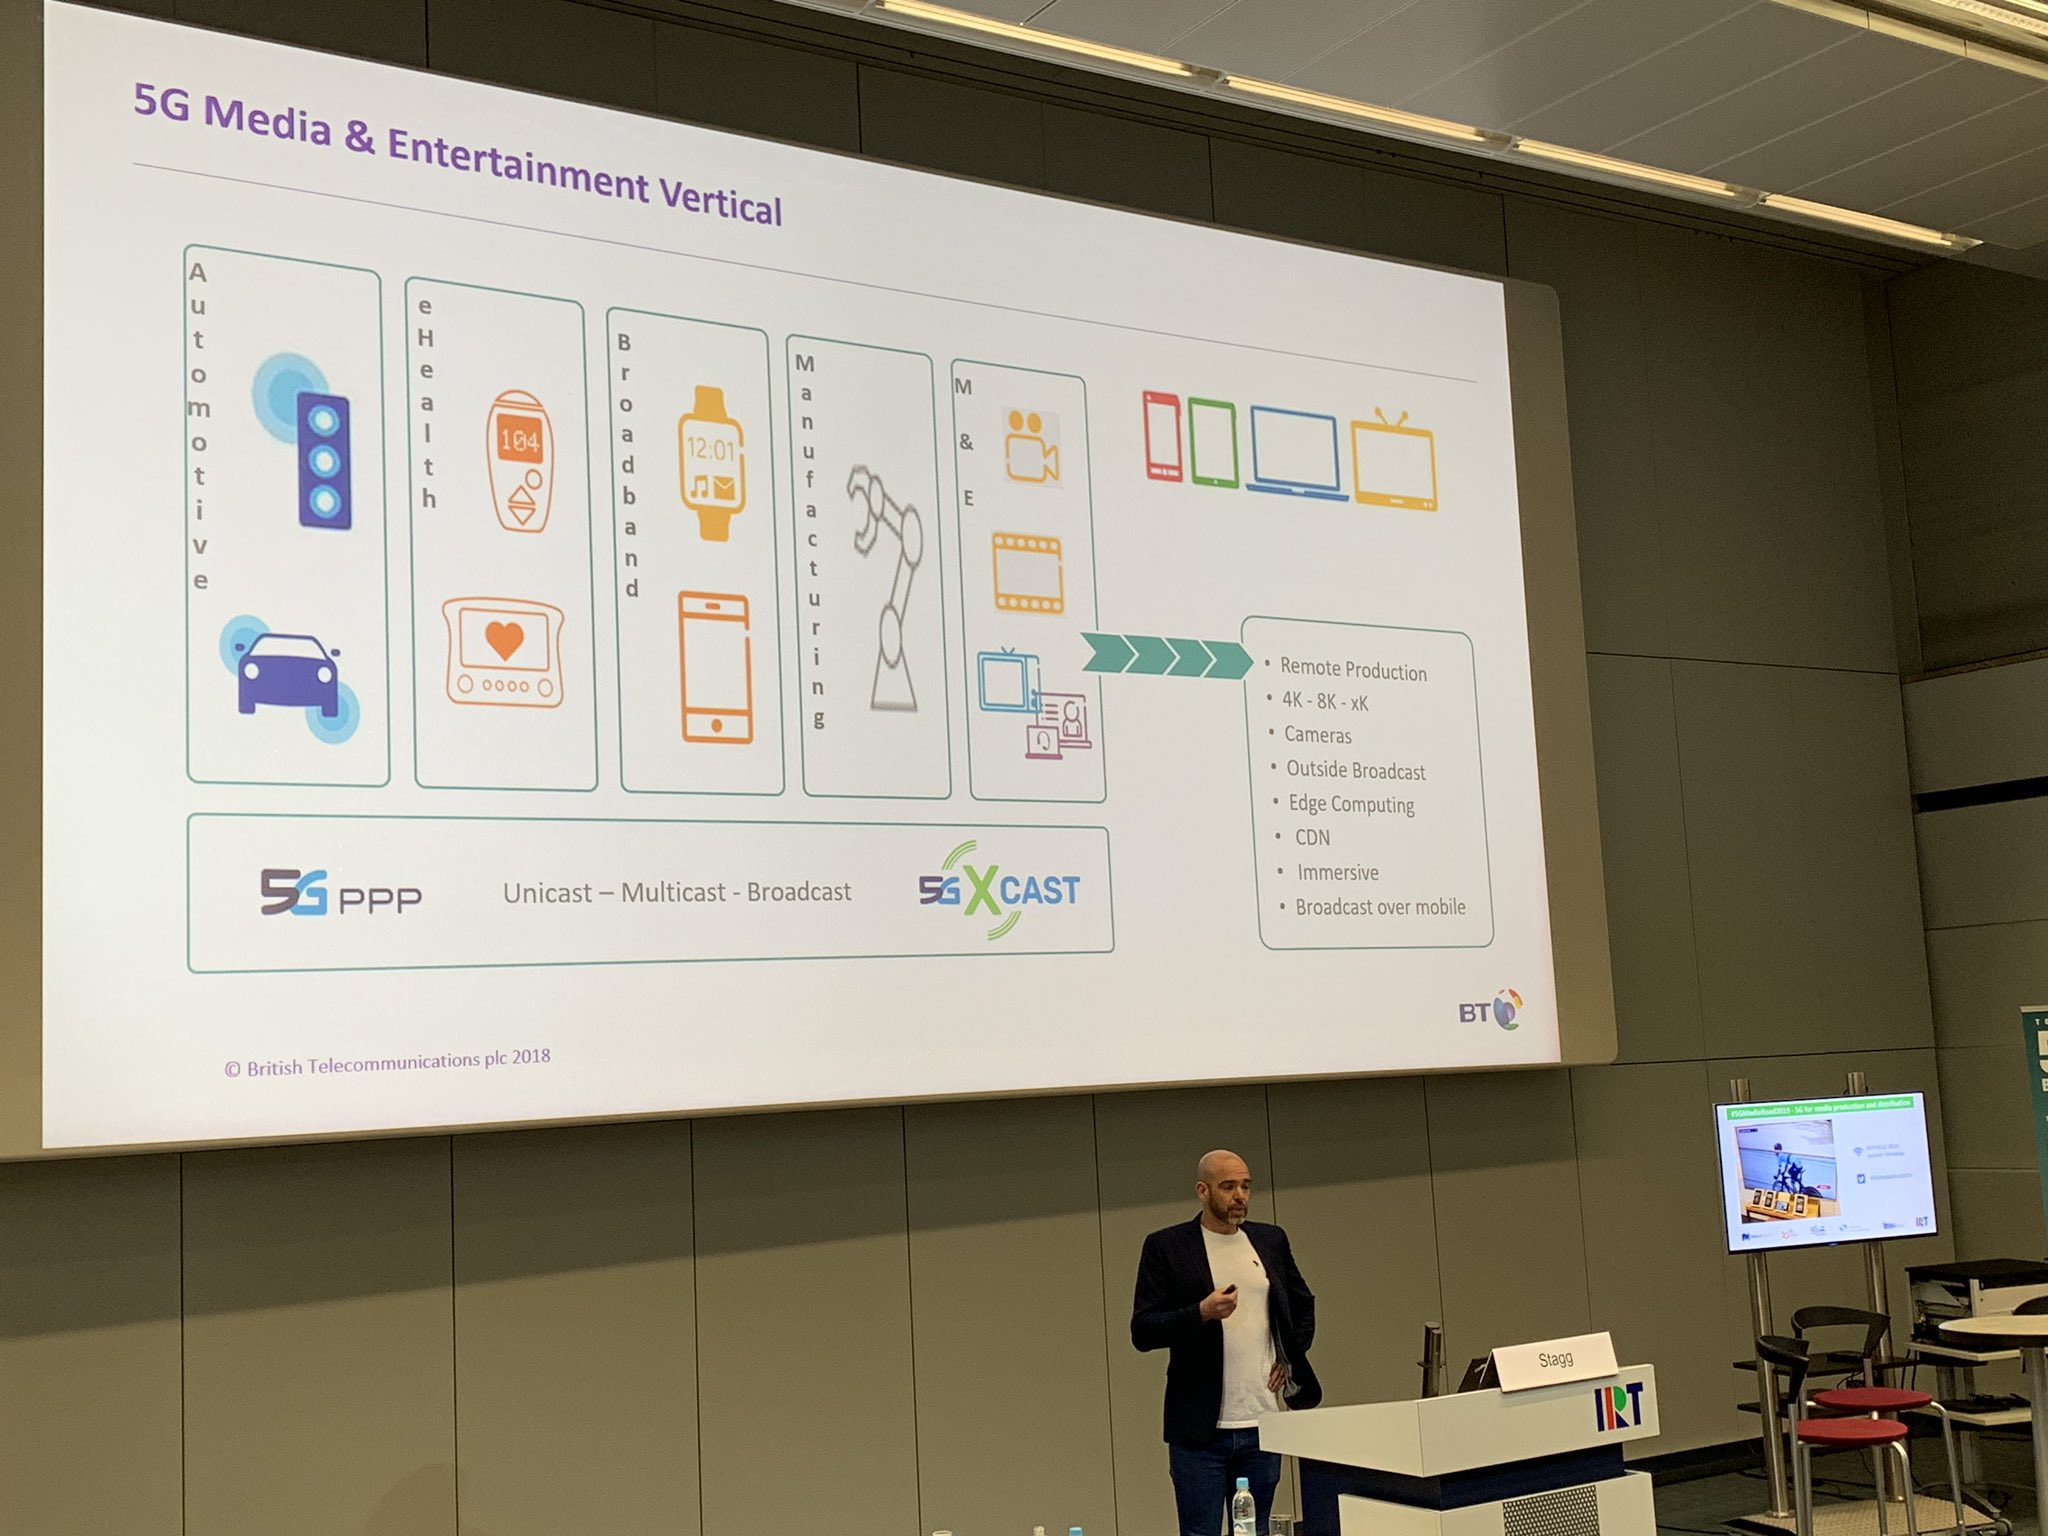 5G-Xcast participation at #5GMediaRoad2019 – 5G-Xcast